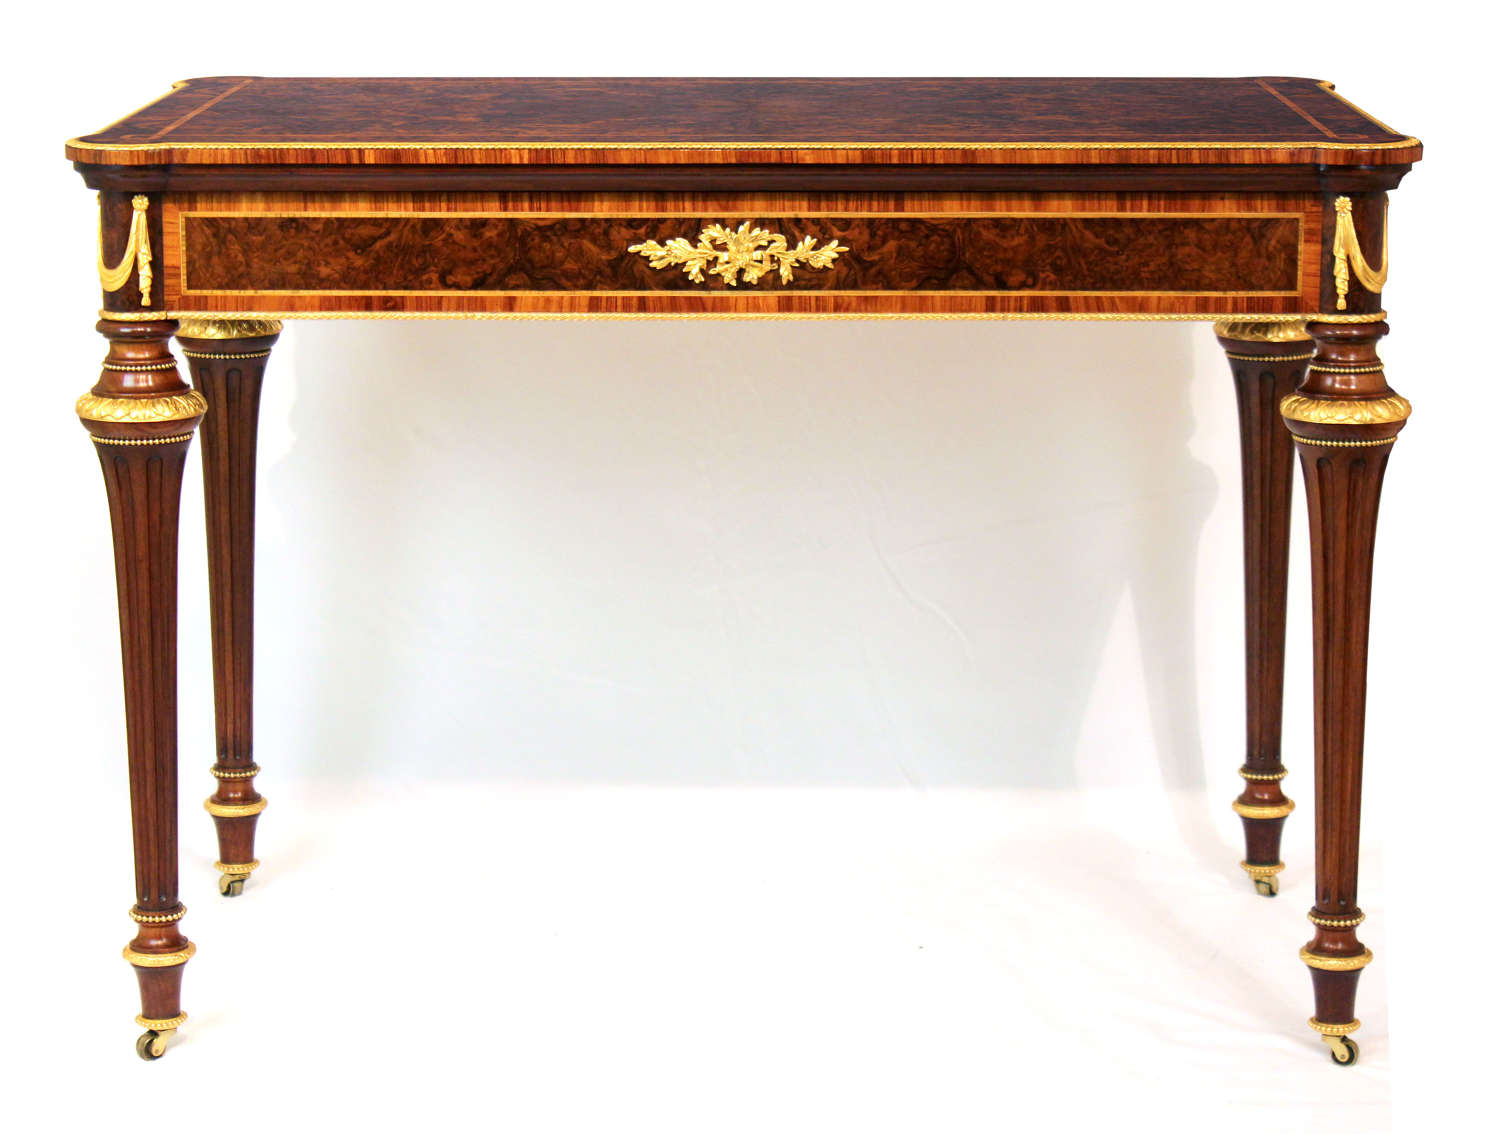 An Exceptional Walnut Inlaid and Ormolu Mounted Card Table